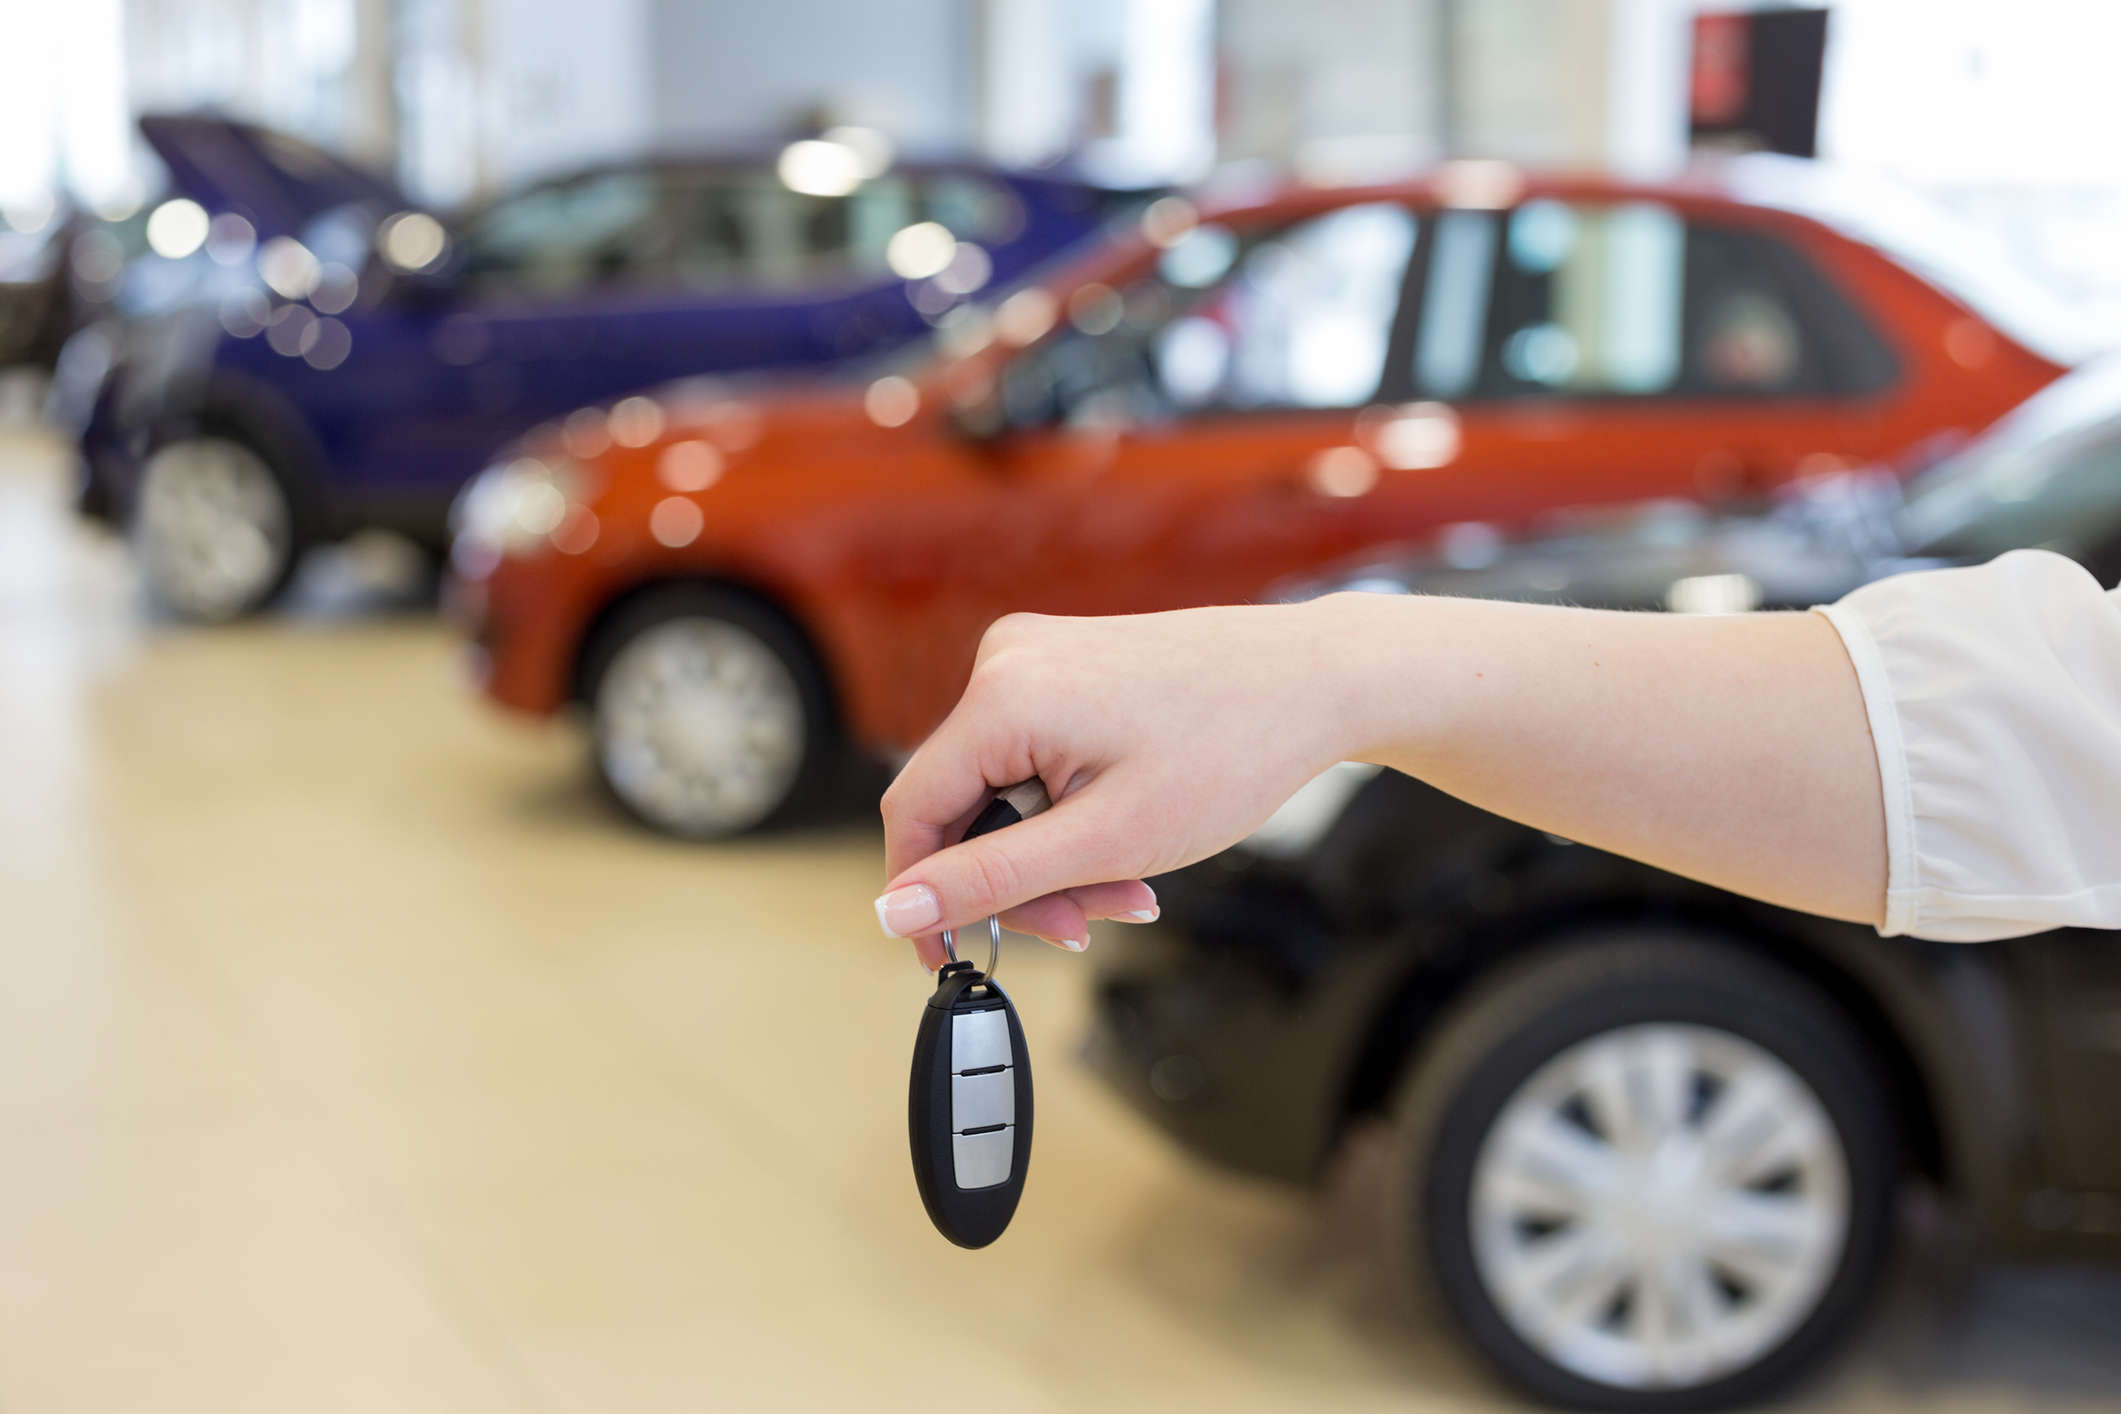 2Ws worst impacted, tough Q1 ahead if crisis persists: Auto dealers